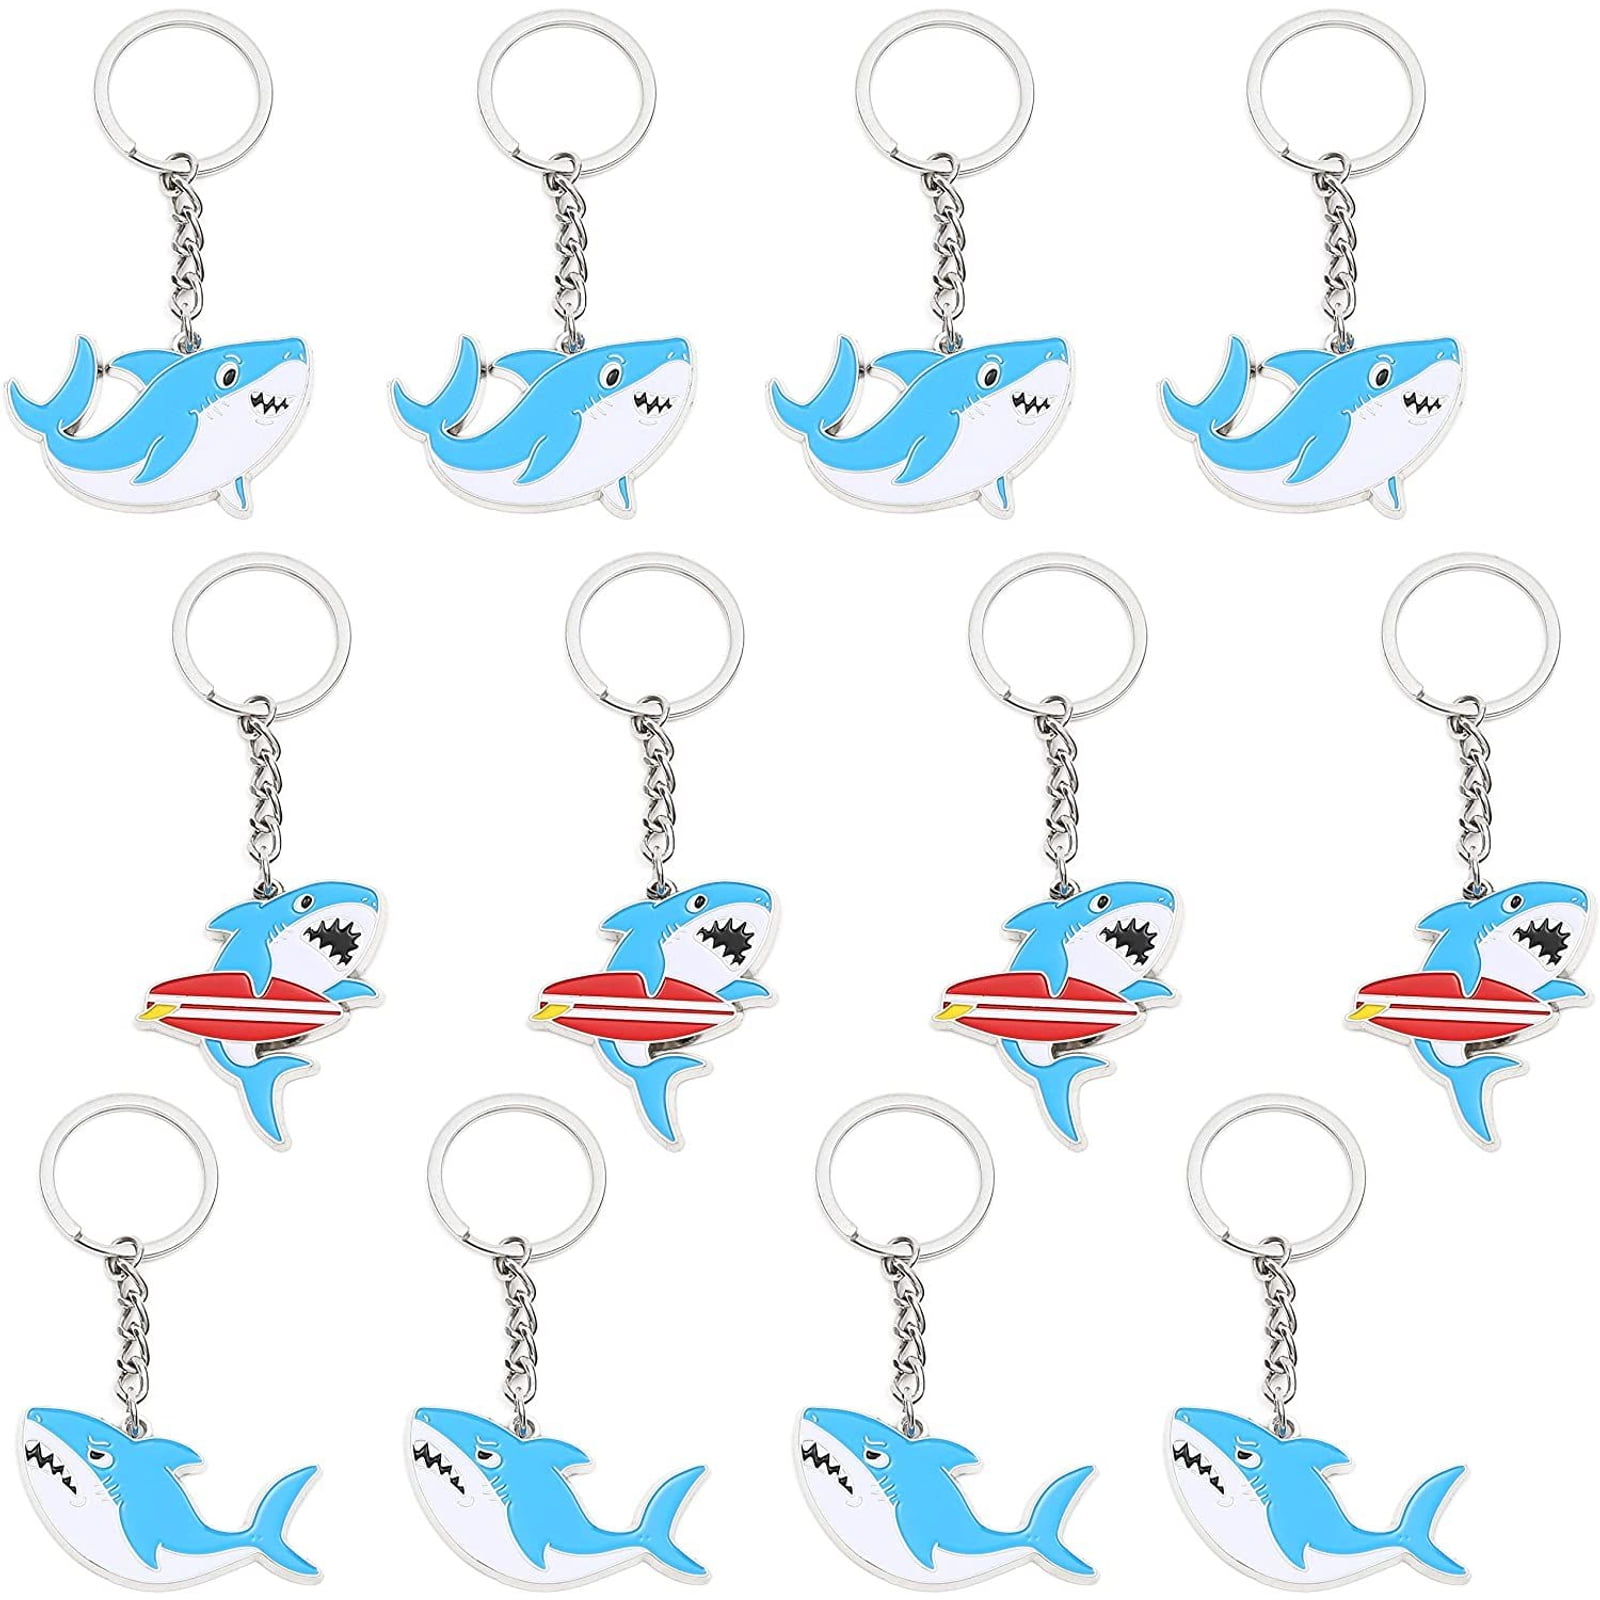 Official Merchandise Gifts for Boys Girls Pack of 5 Collectable 3D Mini Figures Rubber Key Chain for Party Bag Fillers Harry Potter Toys 